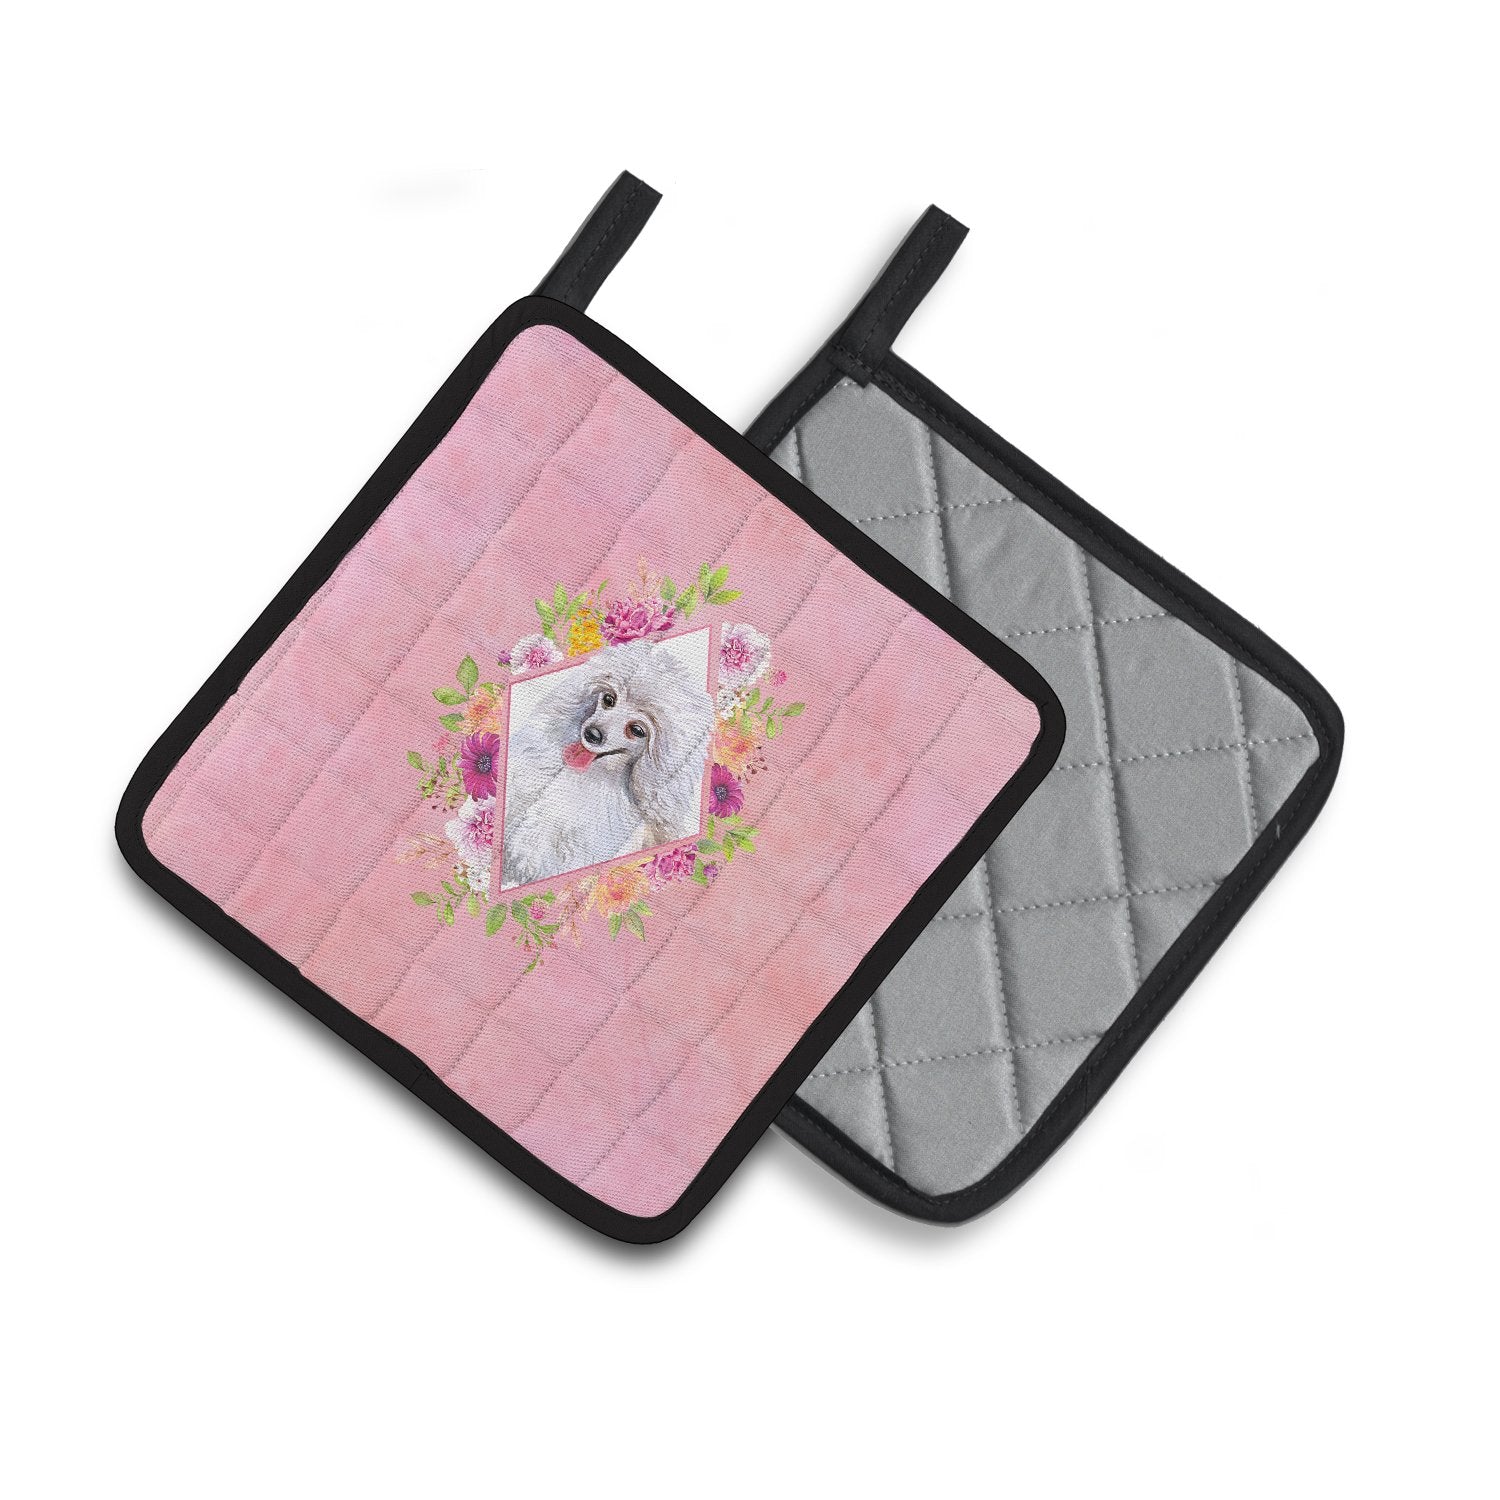 White Mini Poodle Pink Flowers Pair of Pot Holders CK4172PTHD by Caroline's Treasures